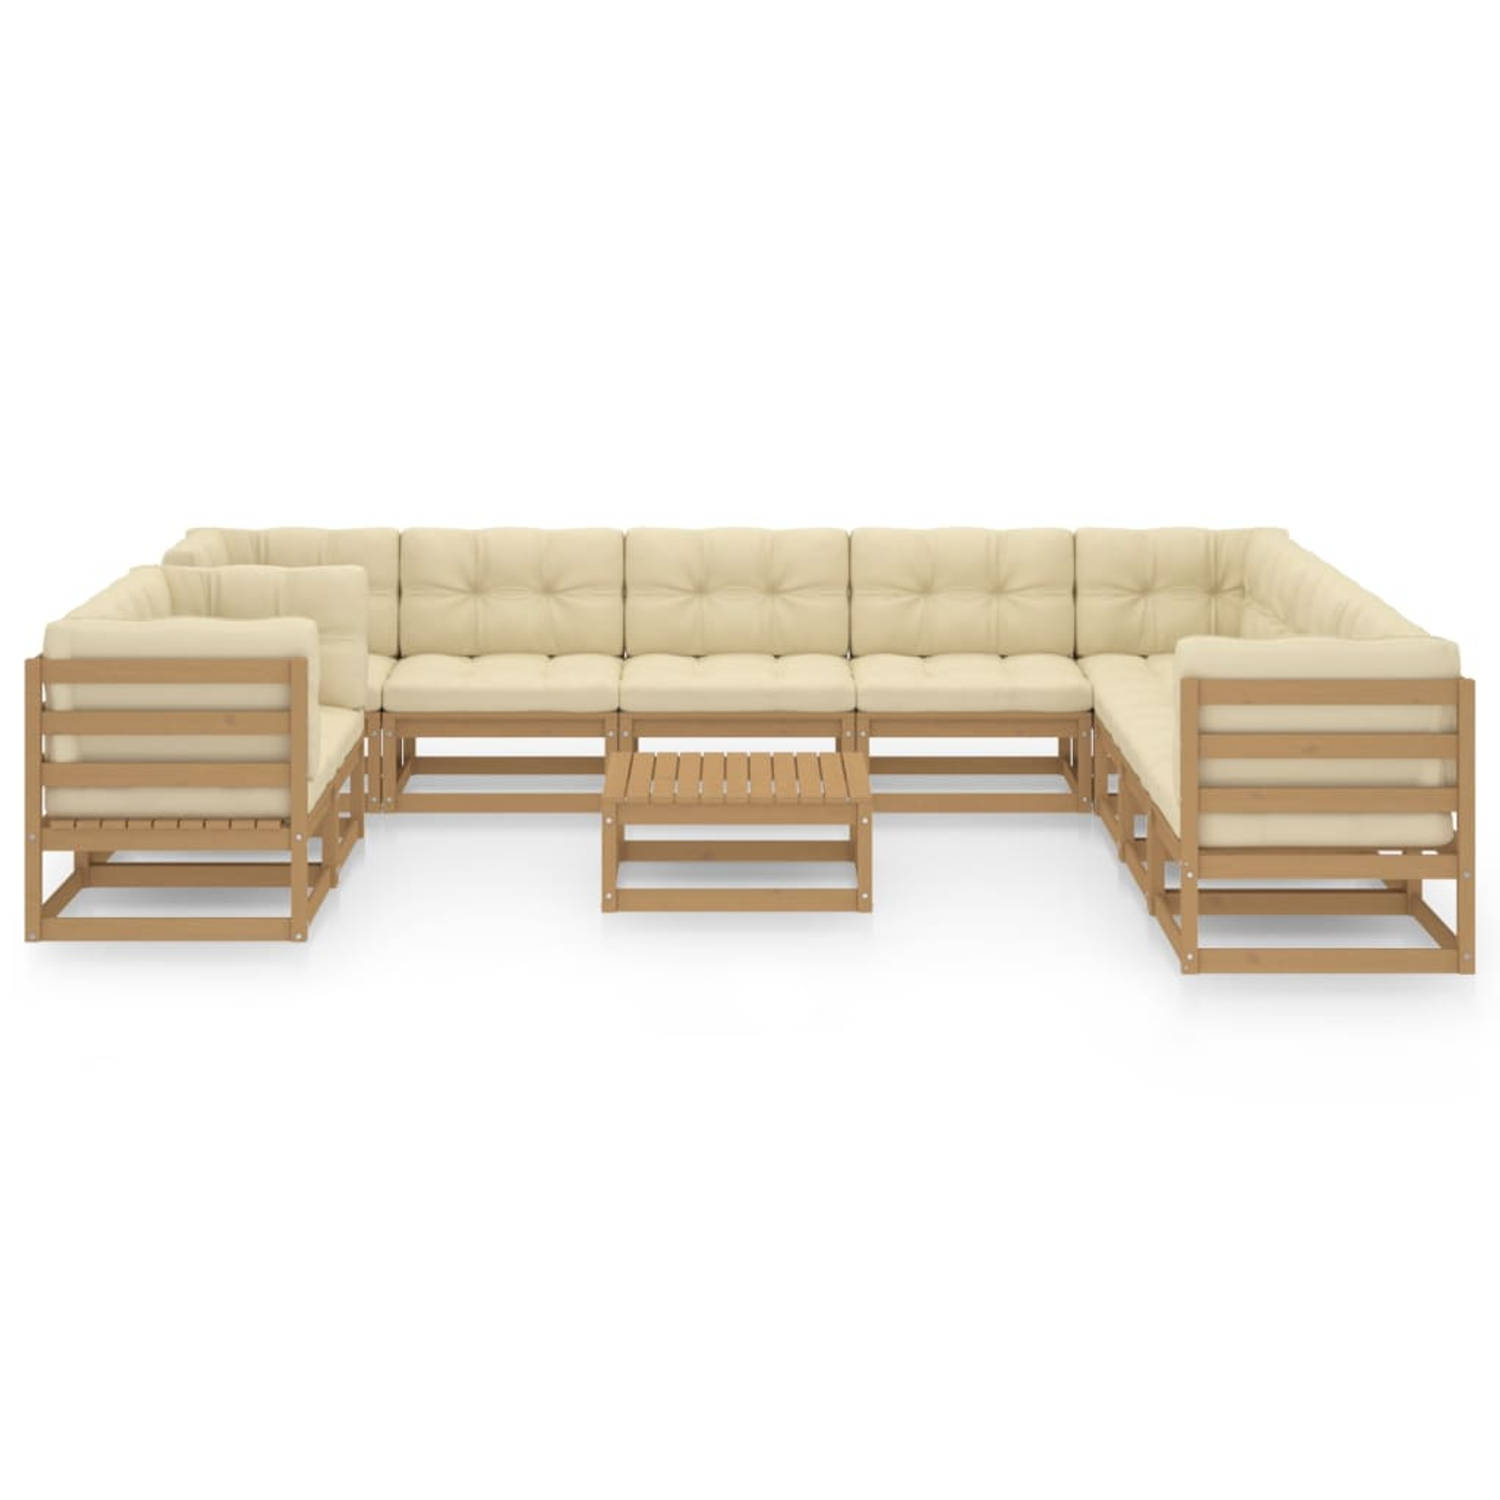 The Living Store Loungeset - Grenenhout - Honingbruin - 70 x 70 x 67 cm - Inclusief kussens